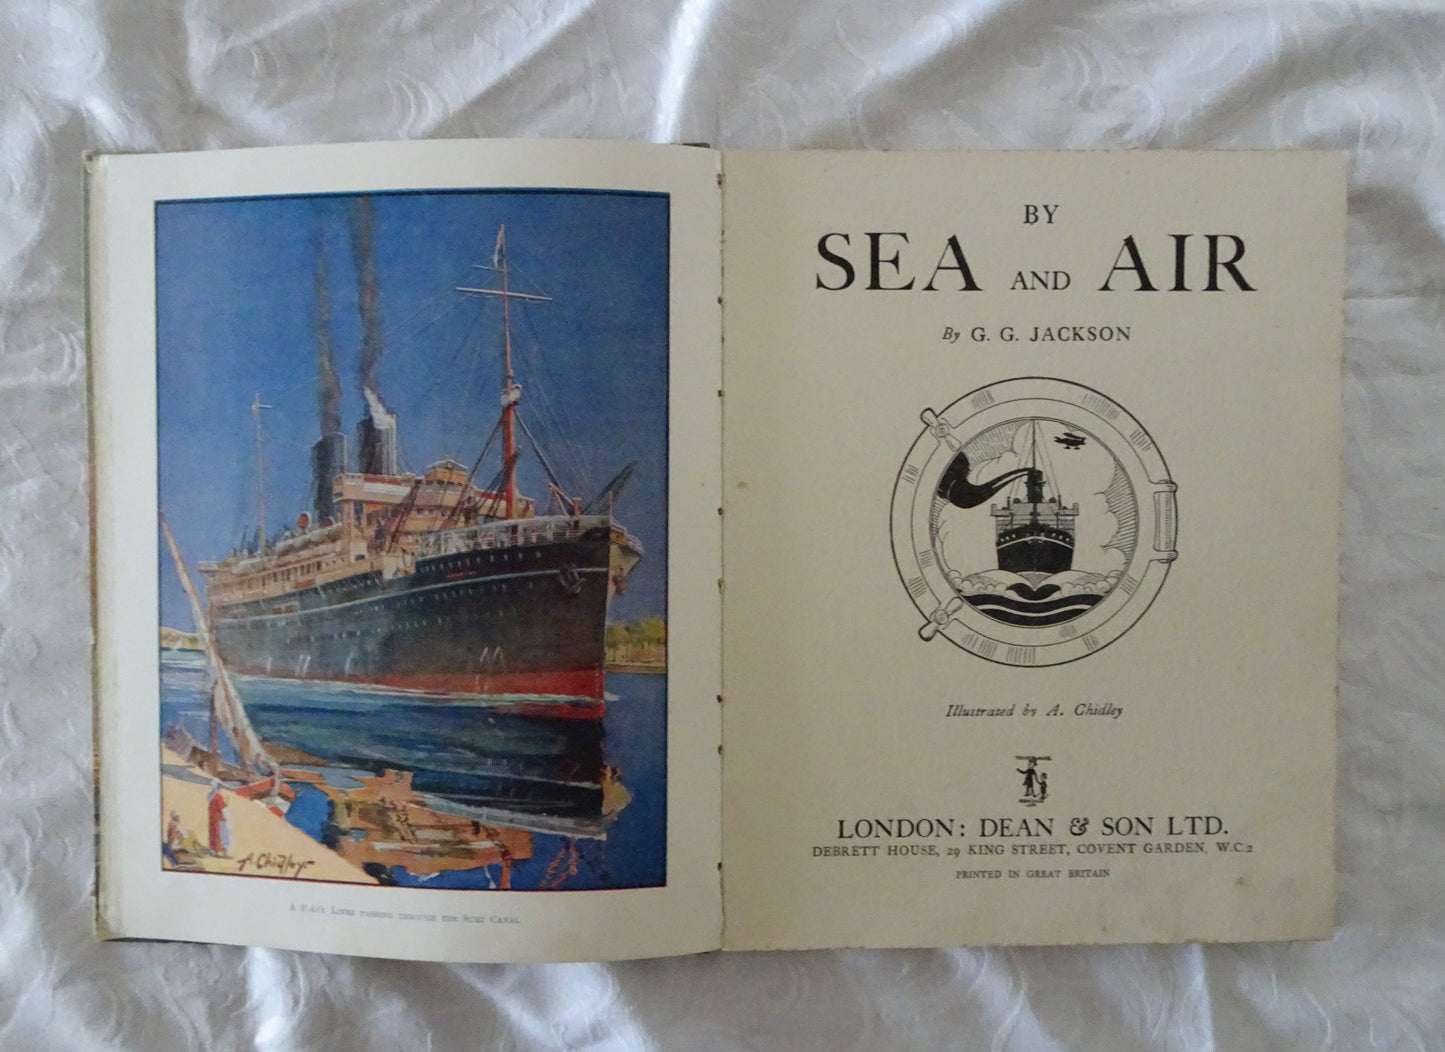 By Sea and Air  by G. G. Jackson, Illustrated by A. Chidley